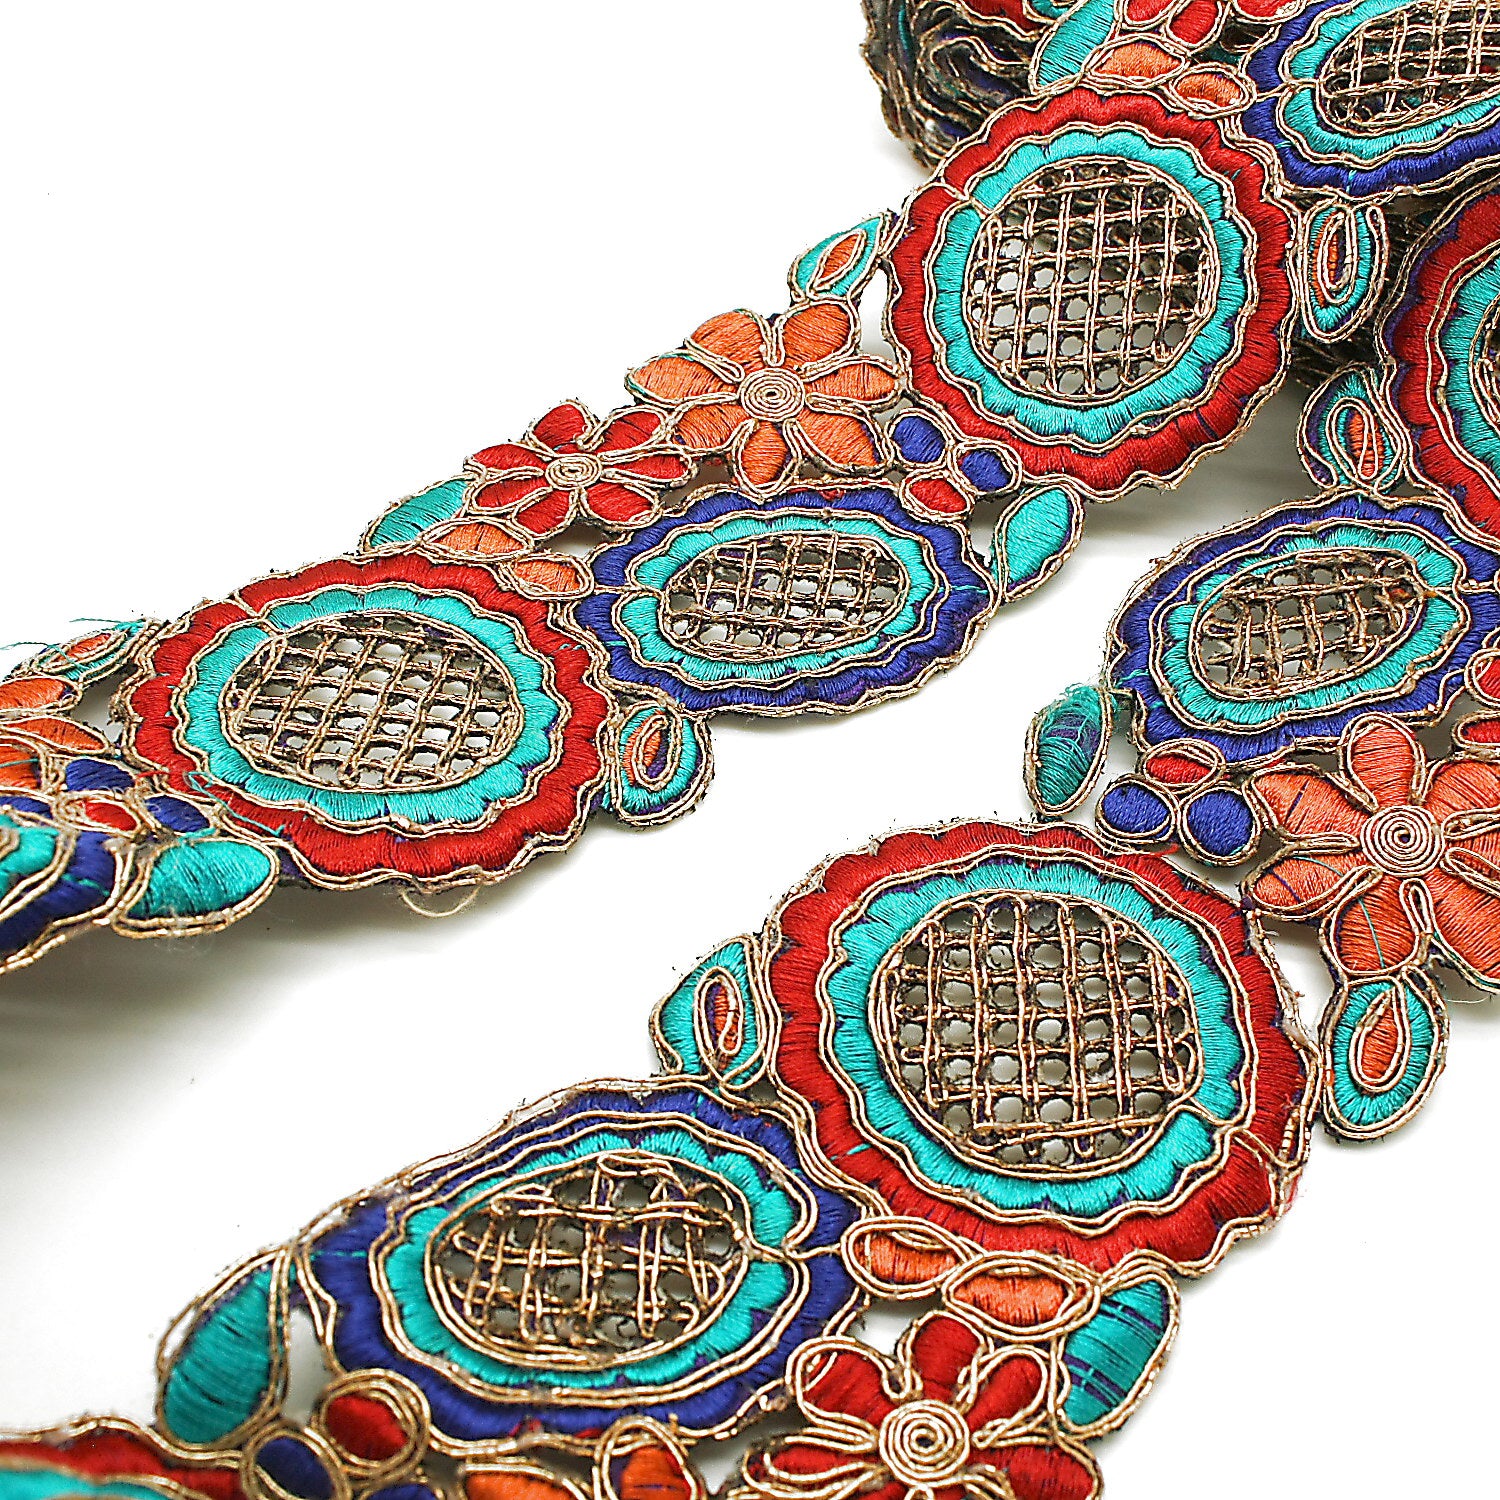 MULTICOLOR EMBROIDERED TRIM - sarahi.NYC